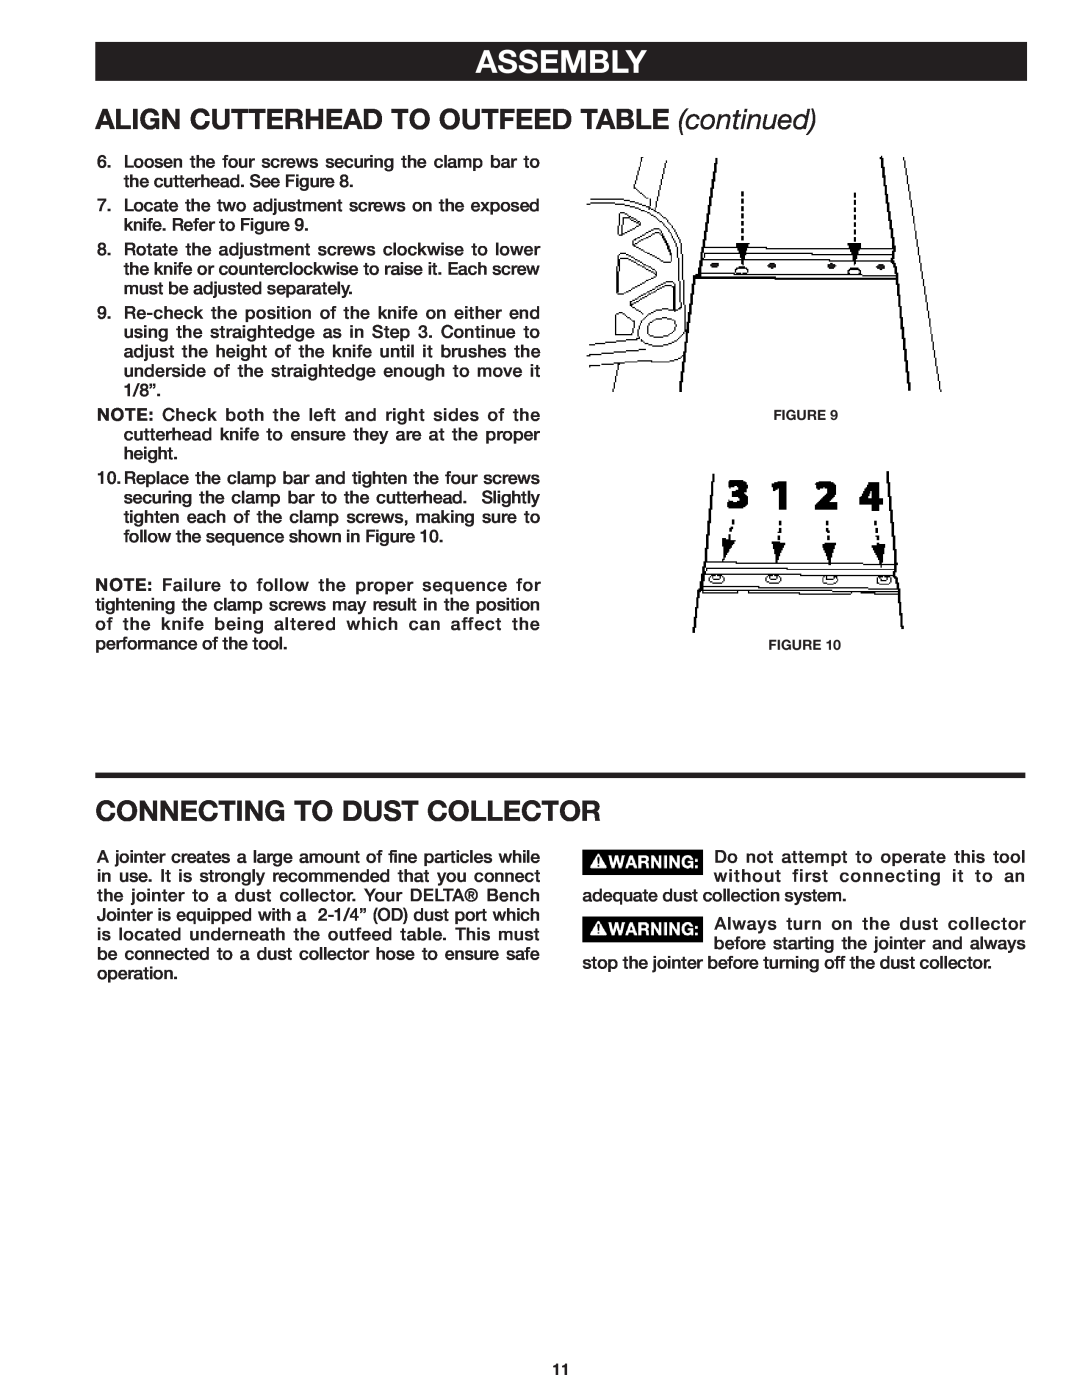 Delta 37-071 instruction manual ALIGN CUTTERHEAD TO OUTFEED TABLE continued, Connecting To Dust Collector, Assembly 